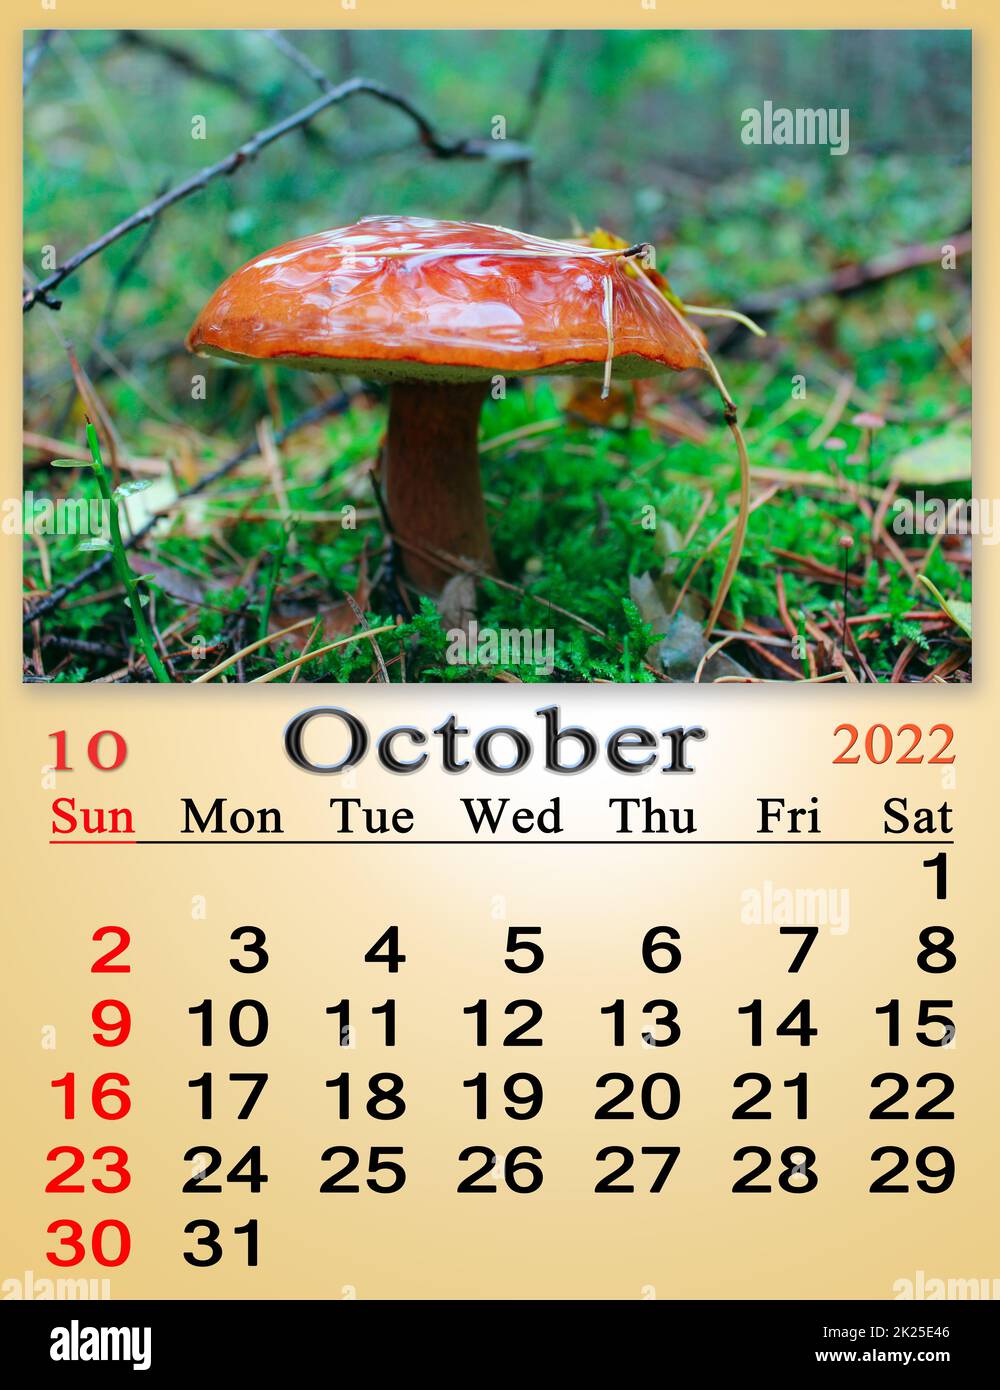 calendar for october 2022 with image of mushroom growing in forest Stock Photo